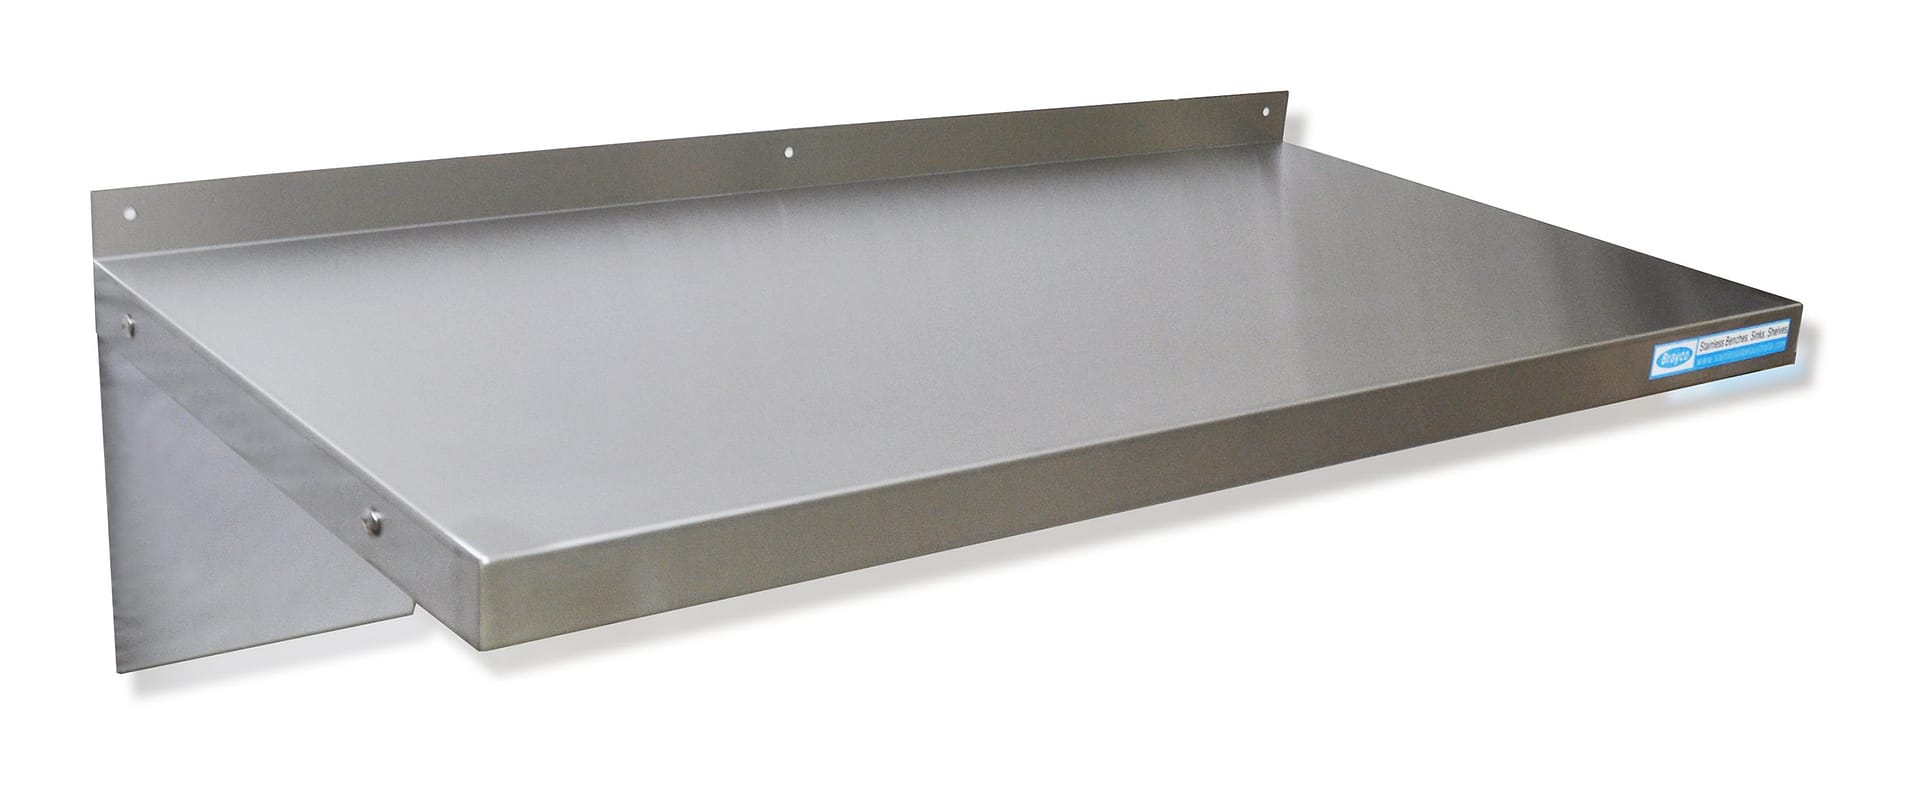 Microwave Wall Shelves, Stainless Steel, 900 X 450mm deep.